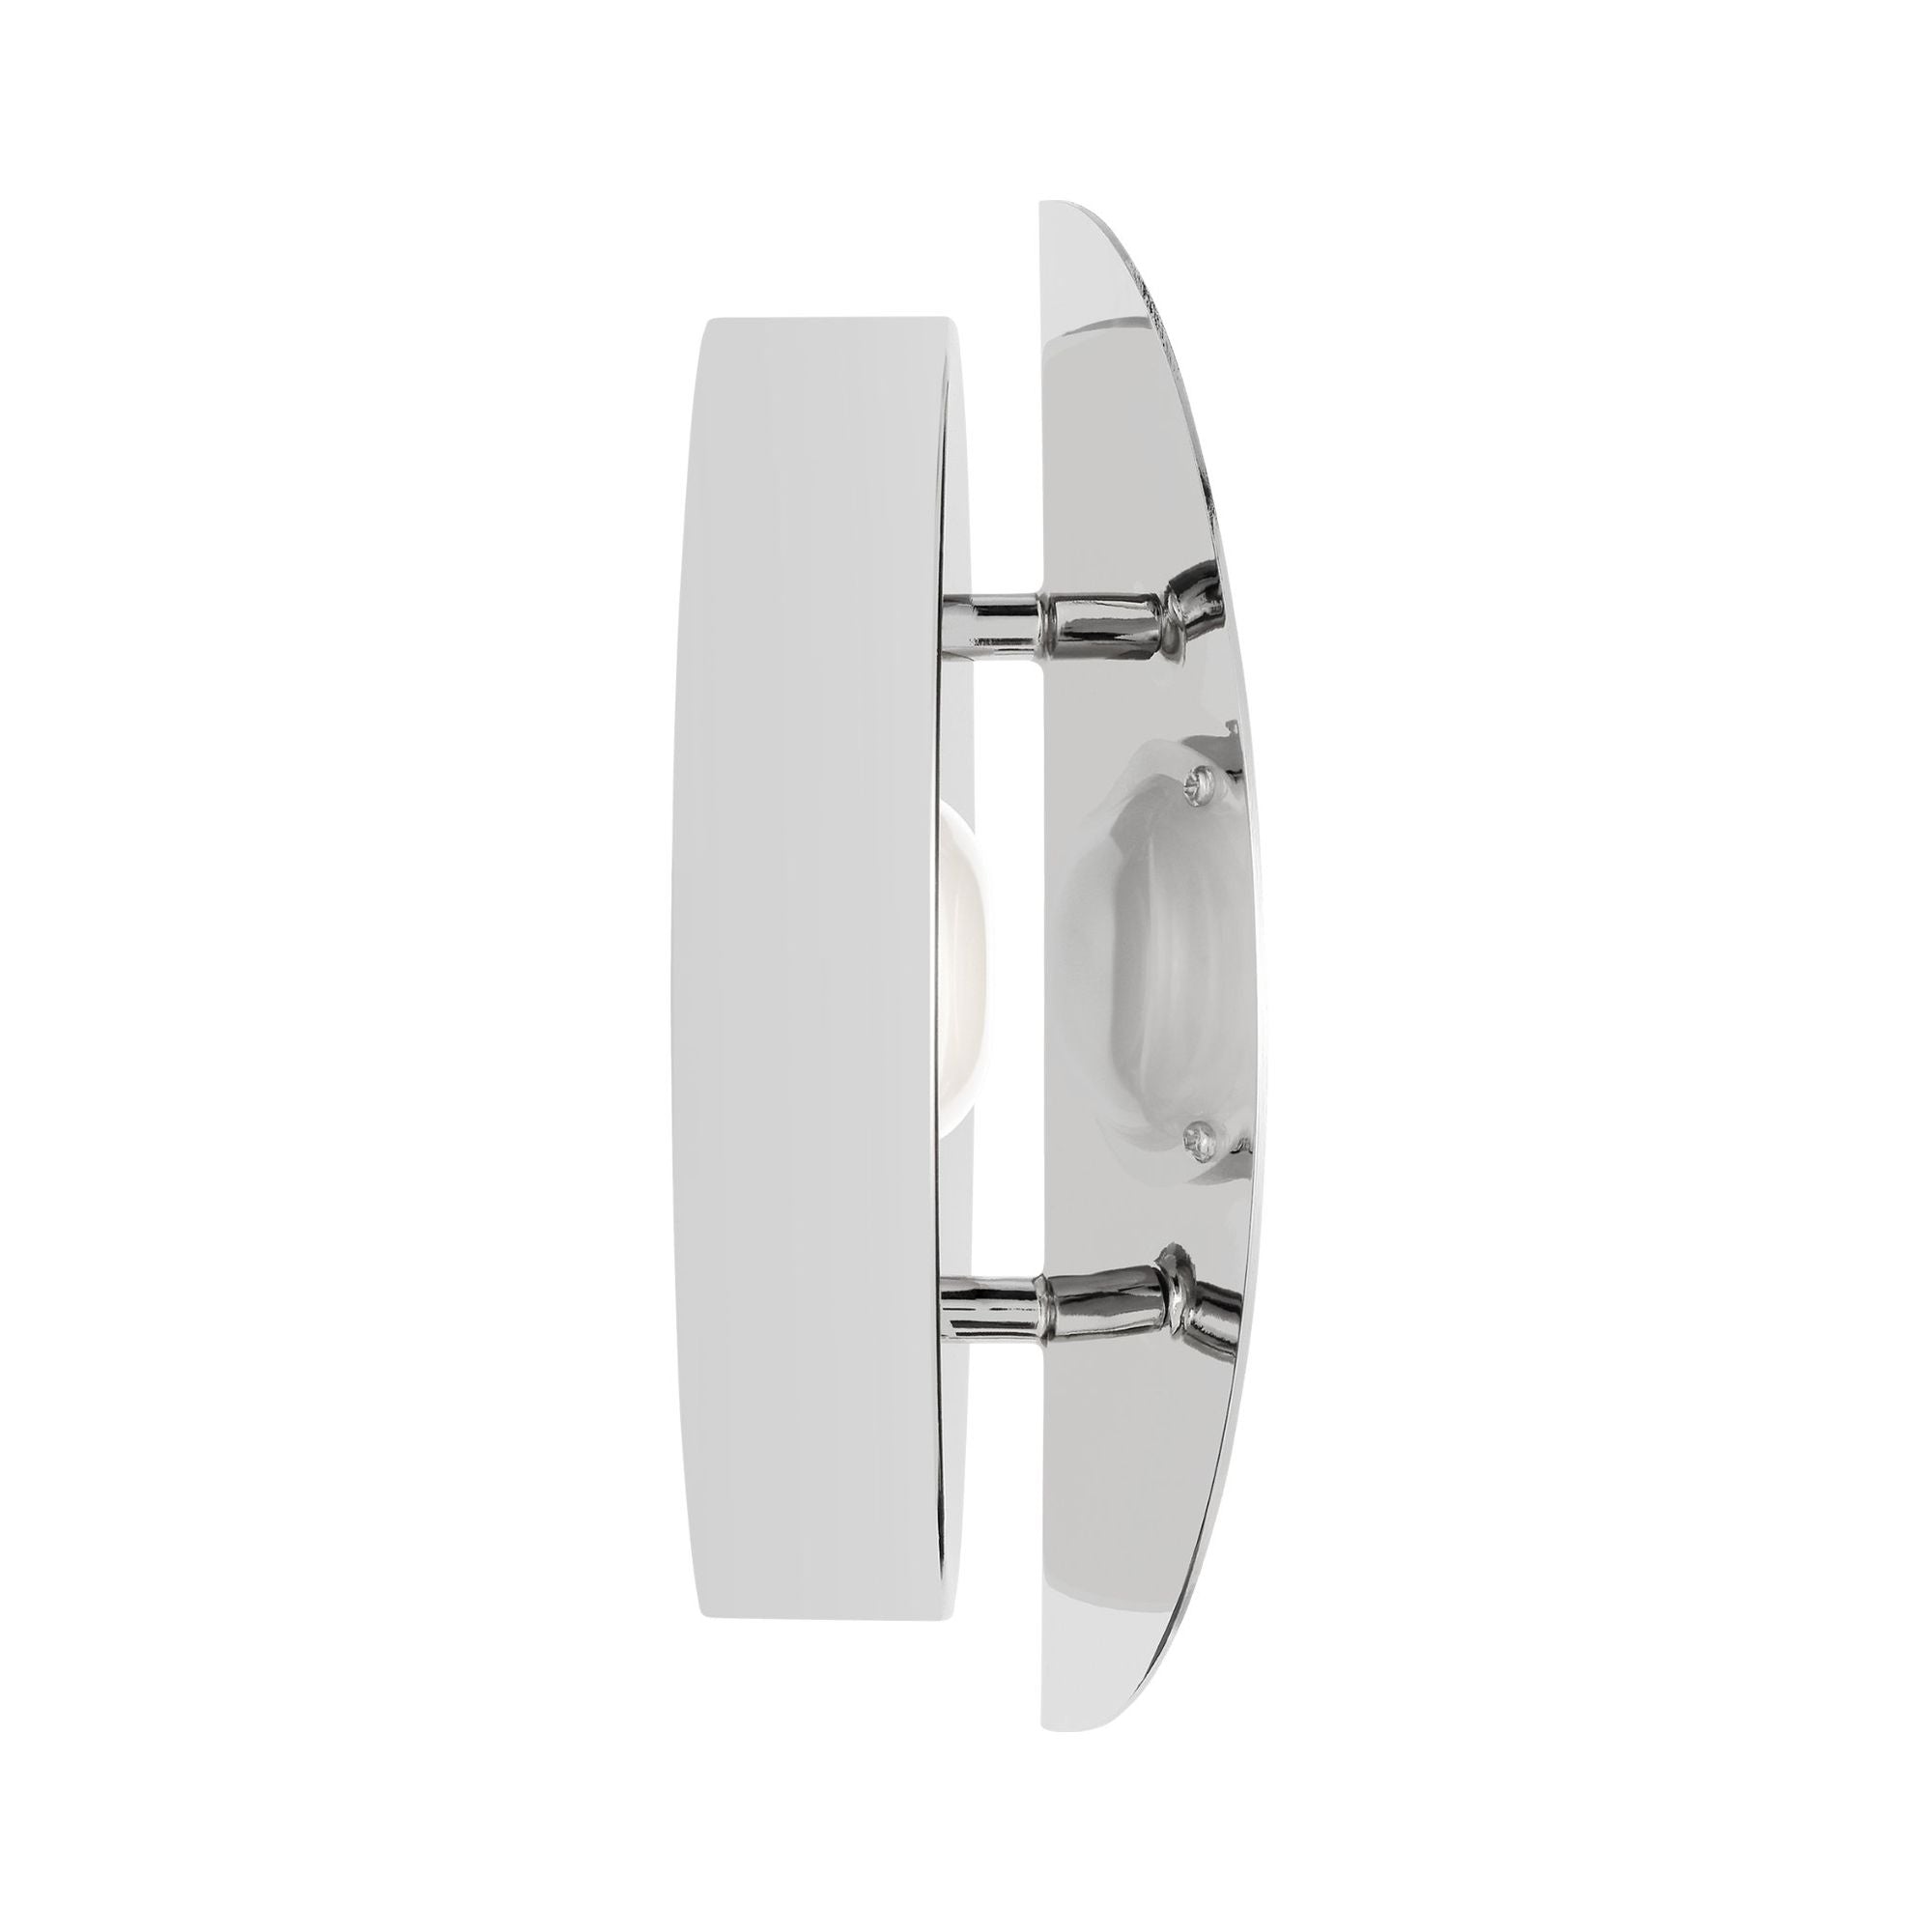 kate spade new york Dottie Small Sconce in Polished Nickel